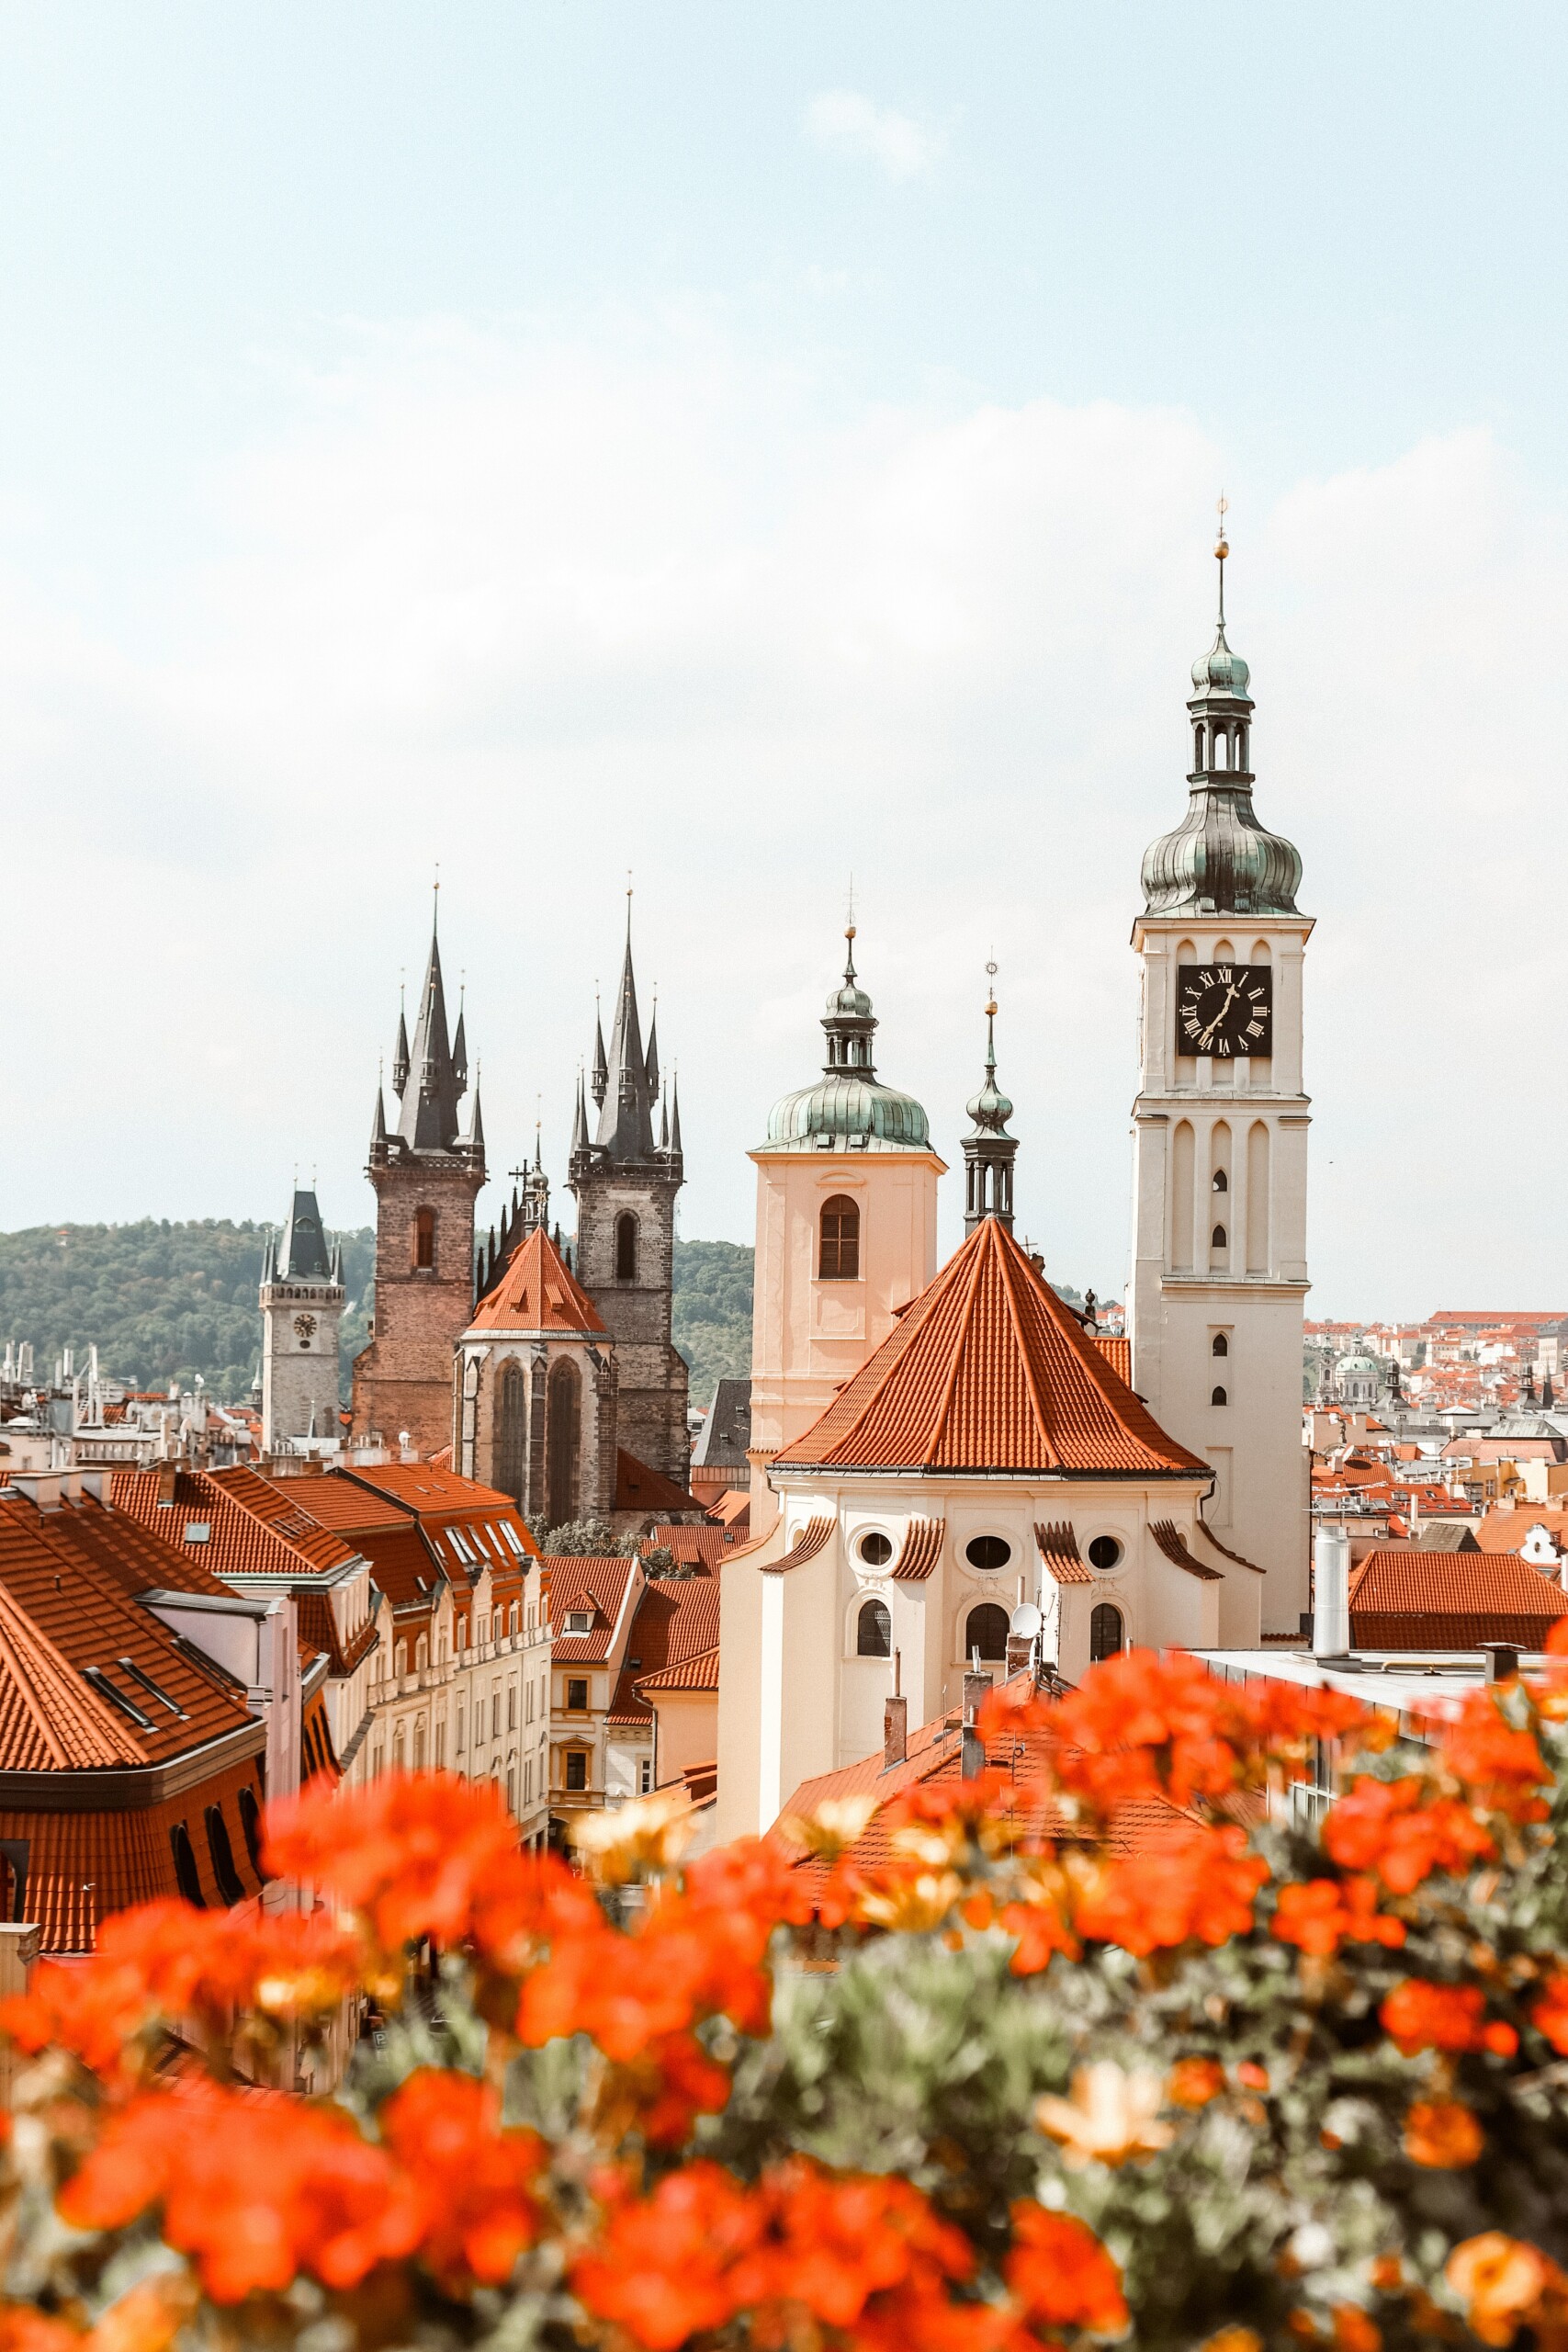 The city of Prague with flowers in the foreground